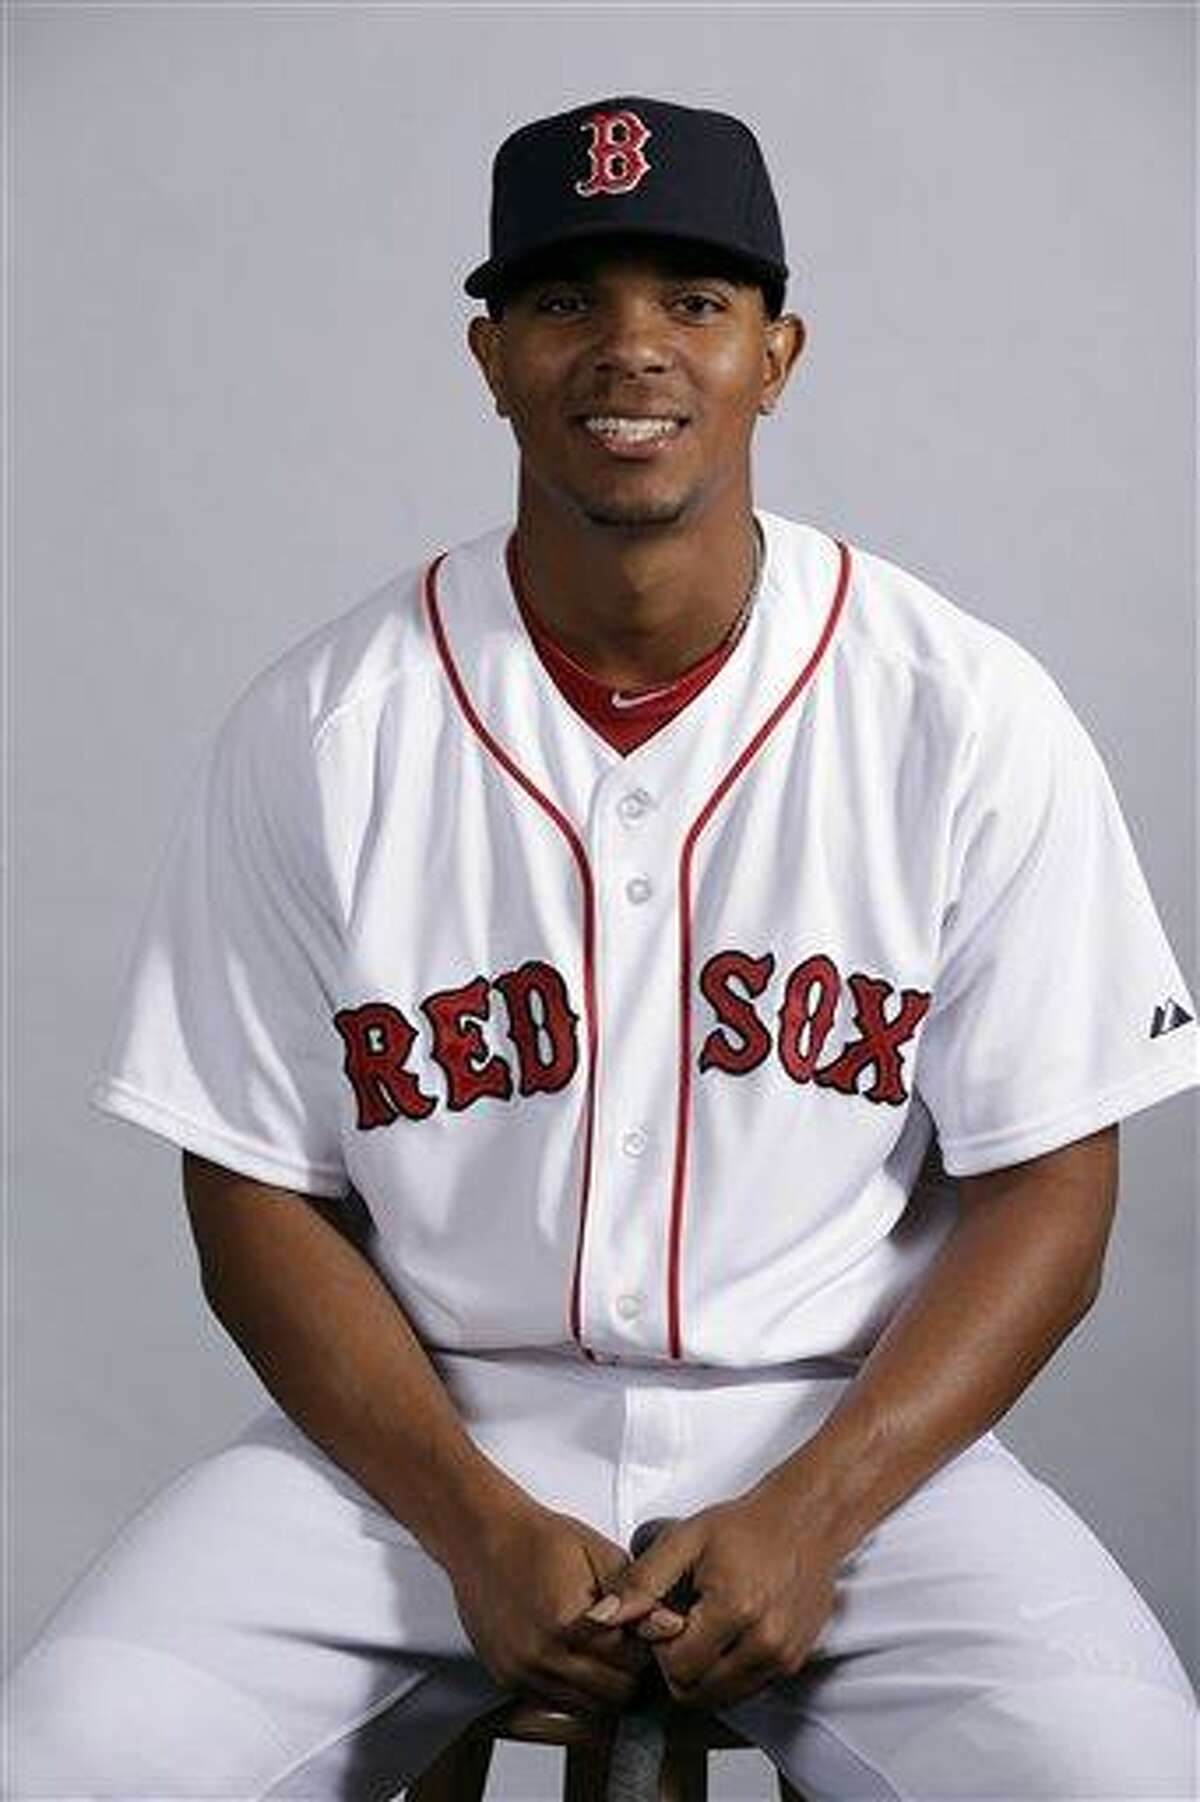 FILE - This Feb. 17, 2013 file photo shows Boston Red Sox's Xander Bogaerts posing during team photo day in Fort Myers, Fla. Bogaerts, Boston's top prospect, is chugging away at his first spring training, doing whatever he can to impress staff and teammates. Either way, though, he'll soon be headed out of town. (AP Photo/Chris O'Meara, File)